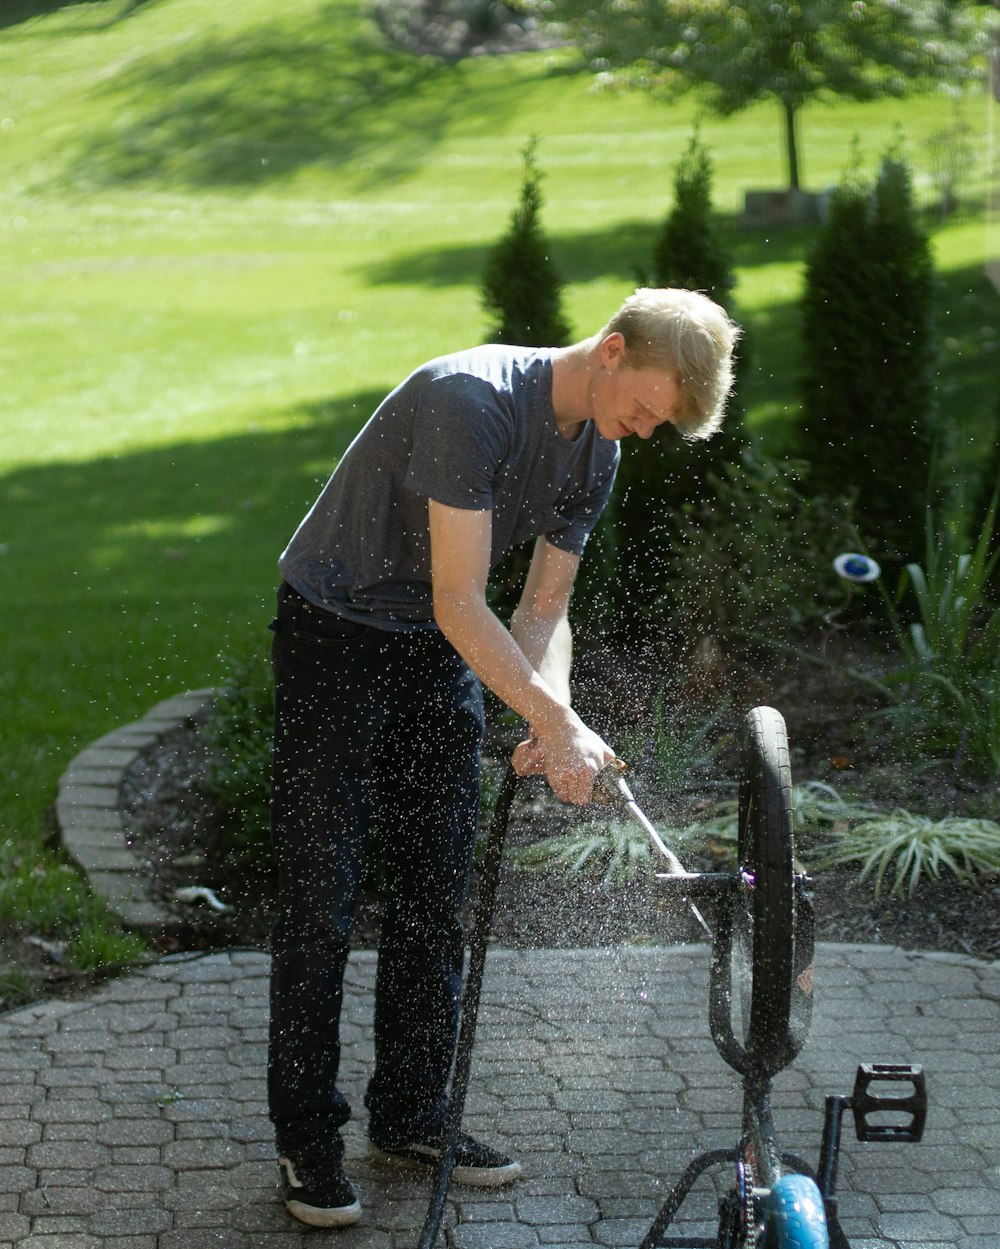 a man using a pressure washer on a patio